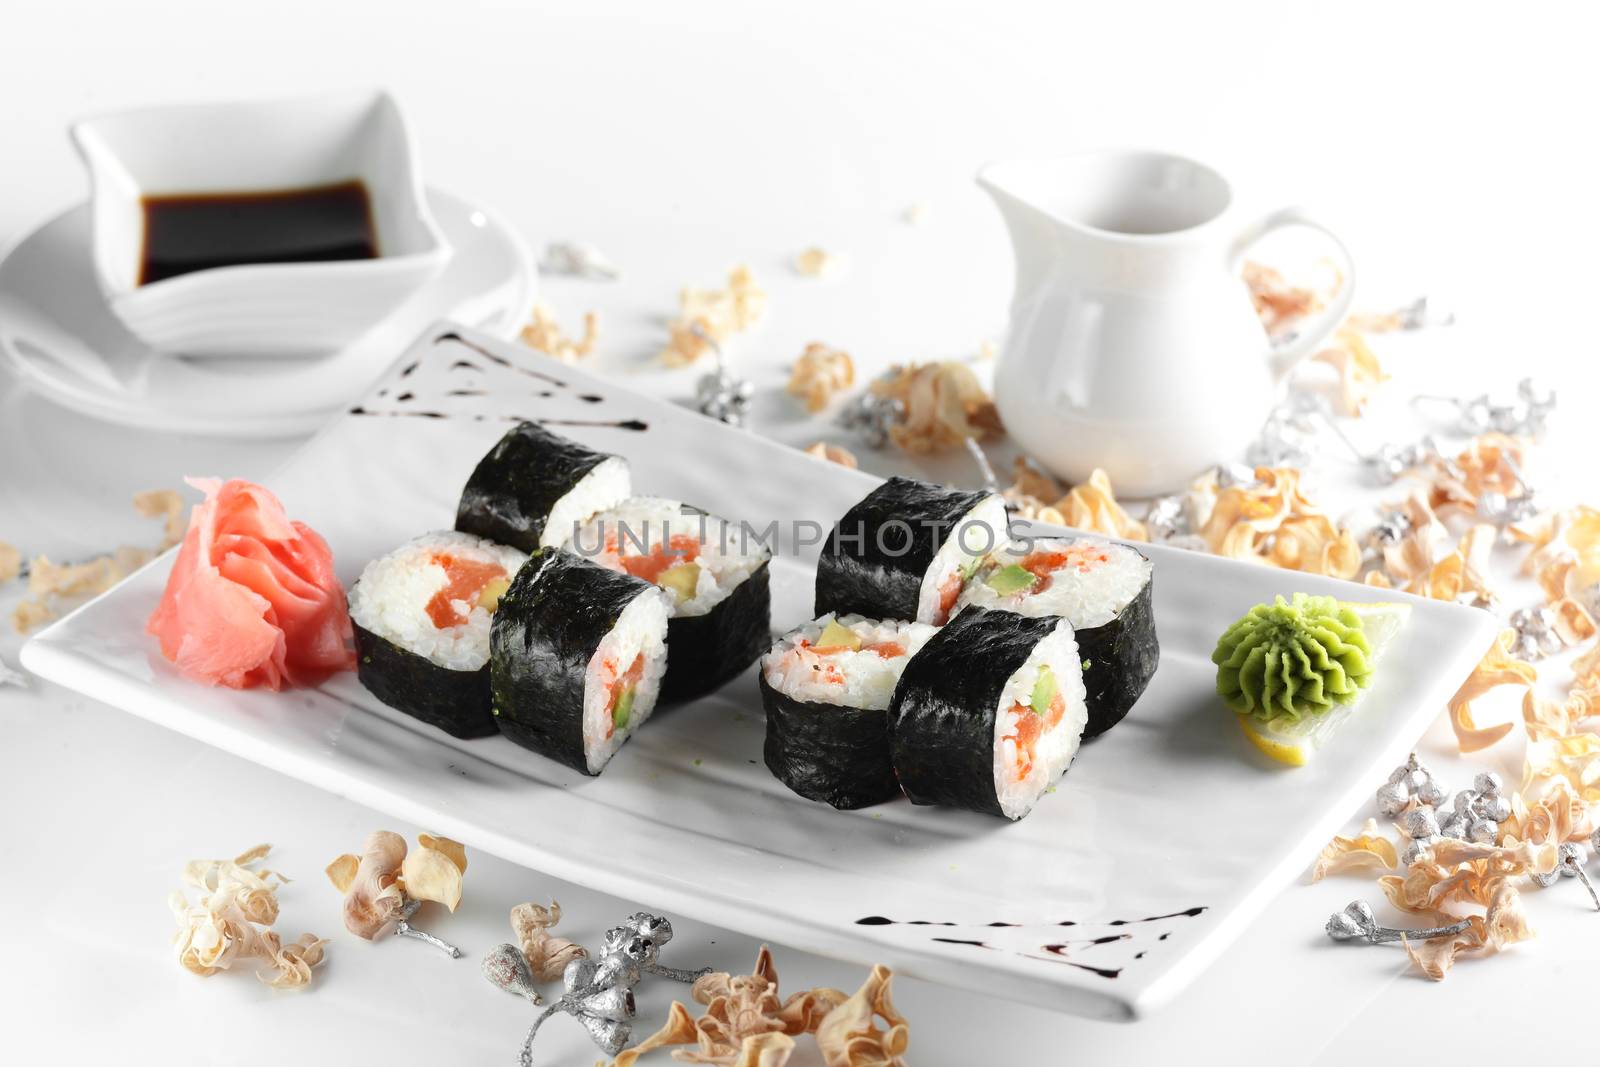 frest and tasty sushi by fiphoto